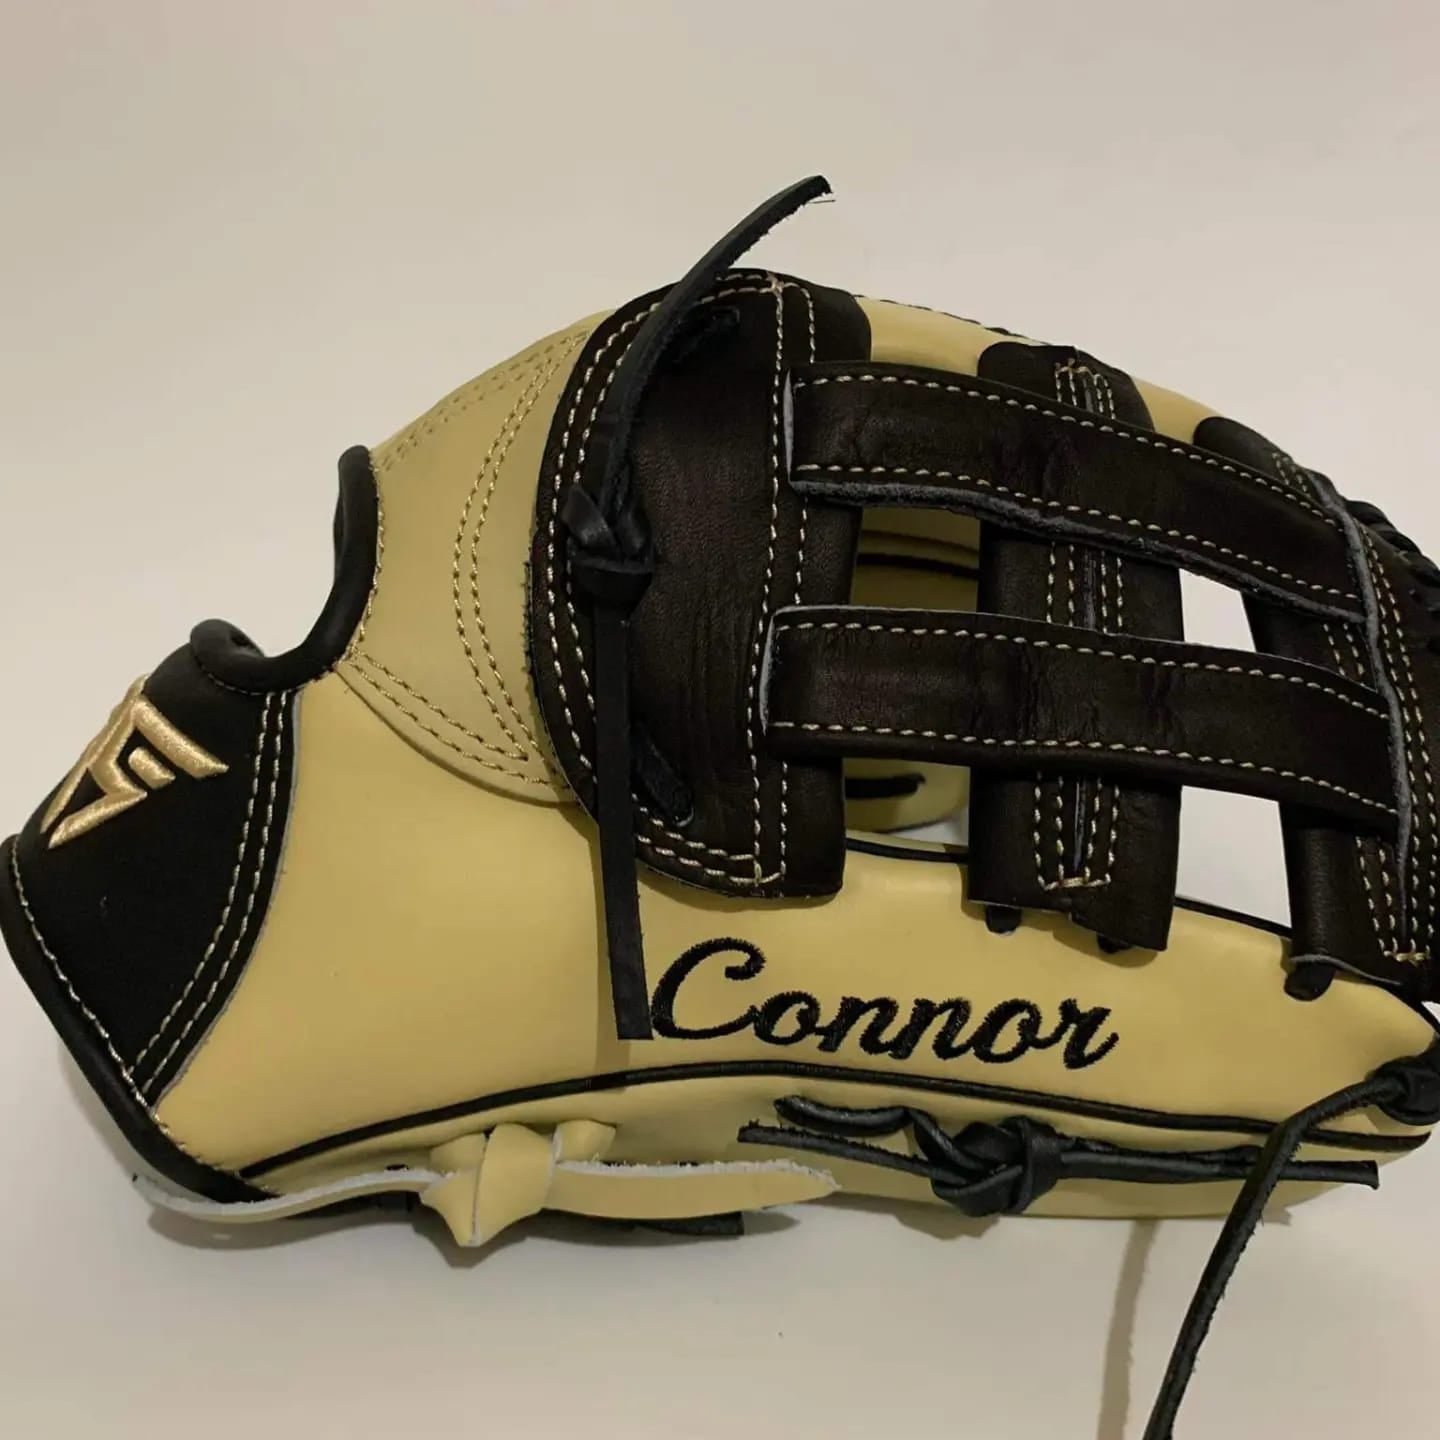 Can you customize a baseball glove online? Yes!